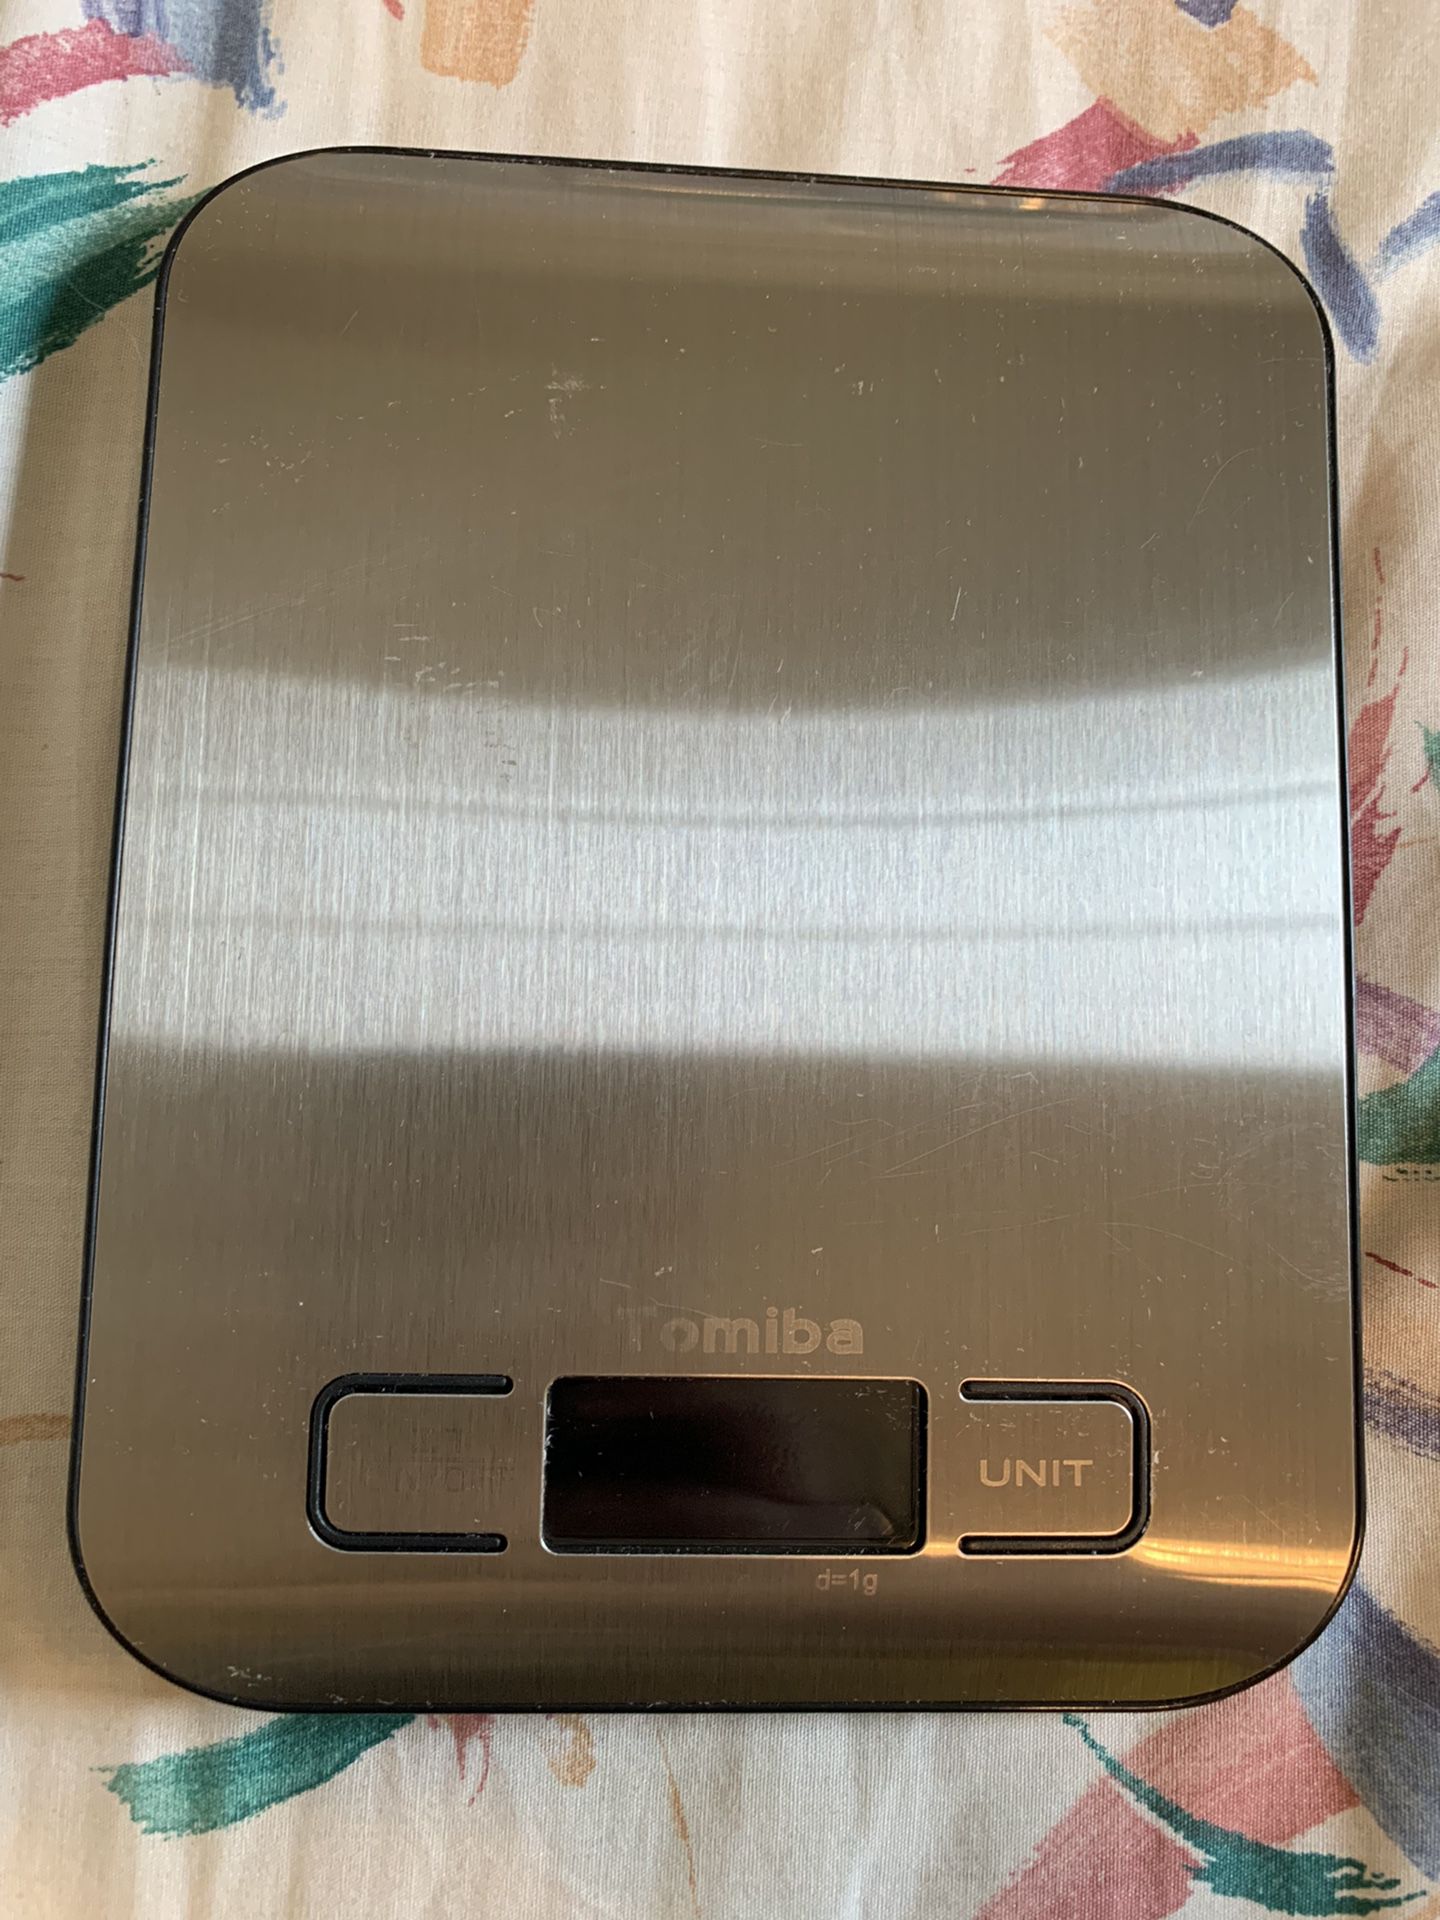 Tomiba Electronic Kitchen Scale (Takes 2 AAA Batteries)